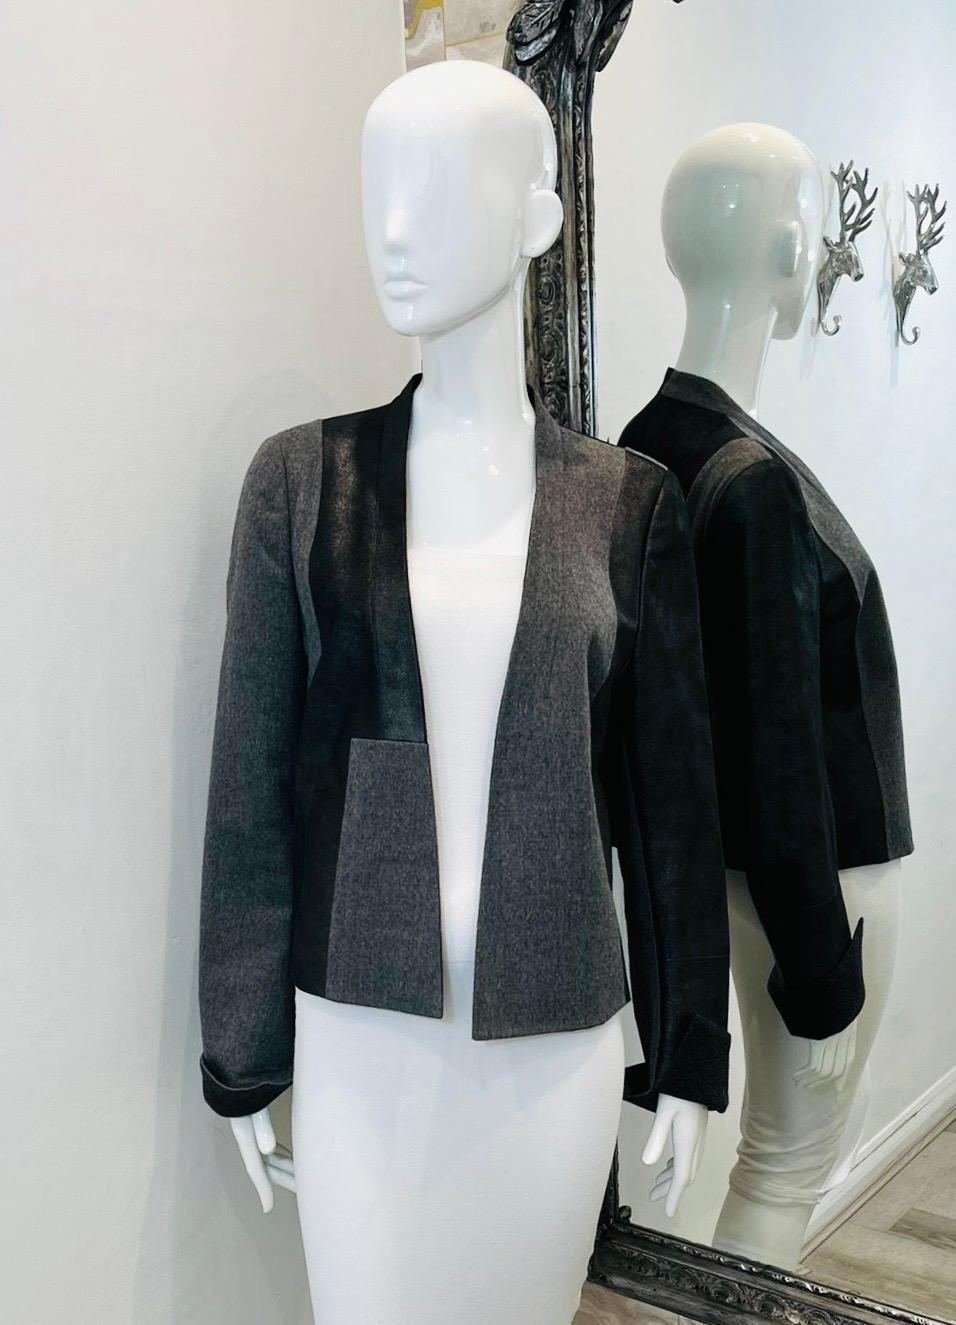 Akris Wool & Leather Open Jacket

Grey jacket designed with nappa leather inserts.

Featuring open front and rolled-up cuffs.

Size – 12US

Condition – Very Good

Composition – Calf Nappa, Wool, Viscose